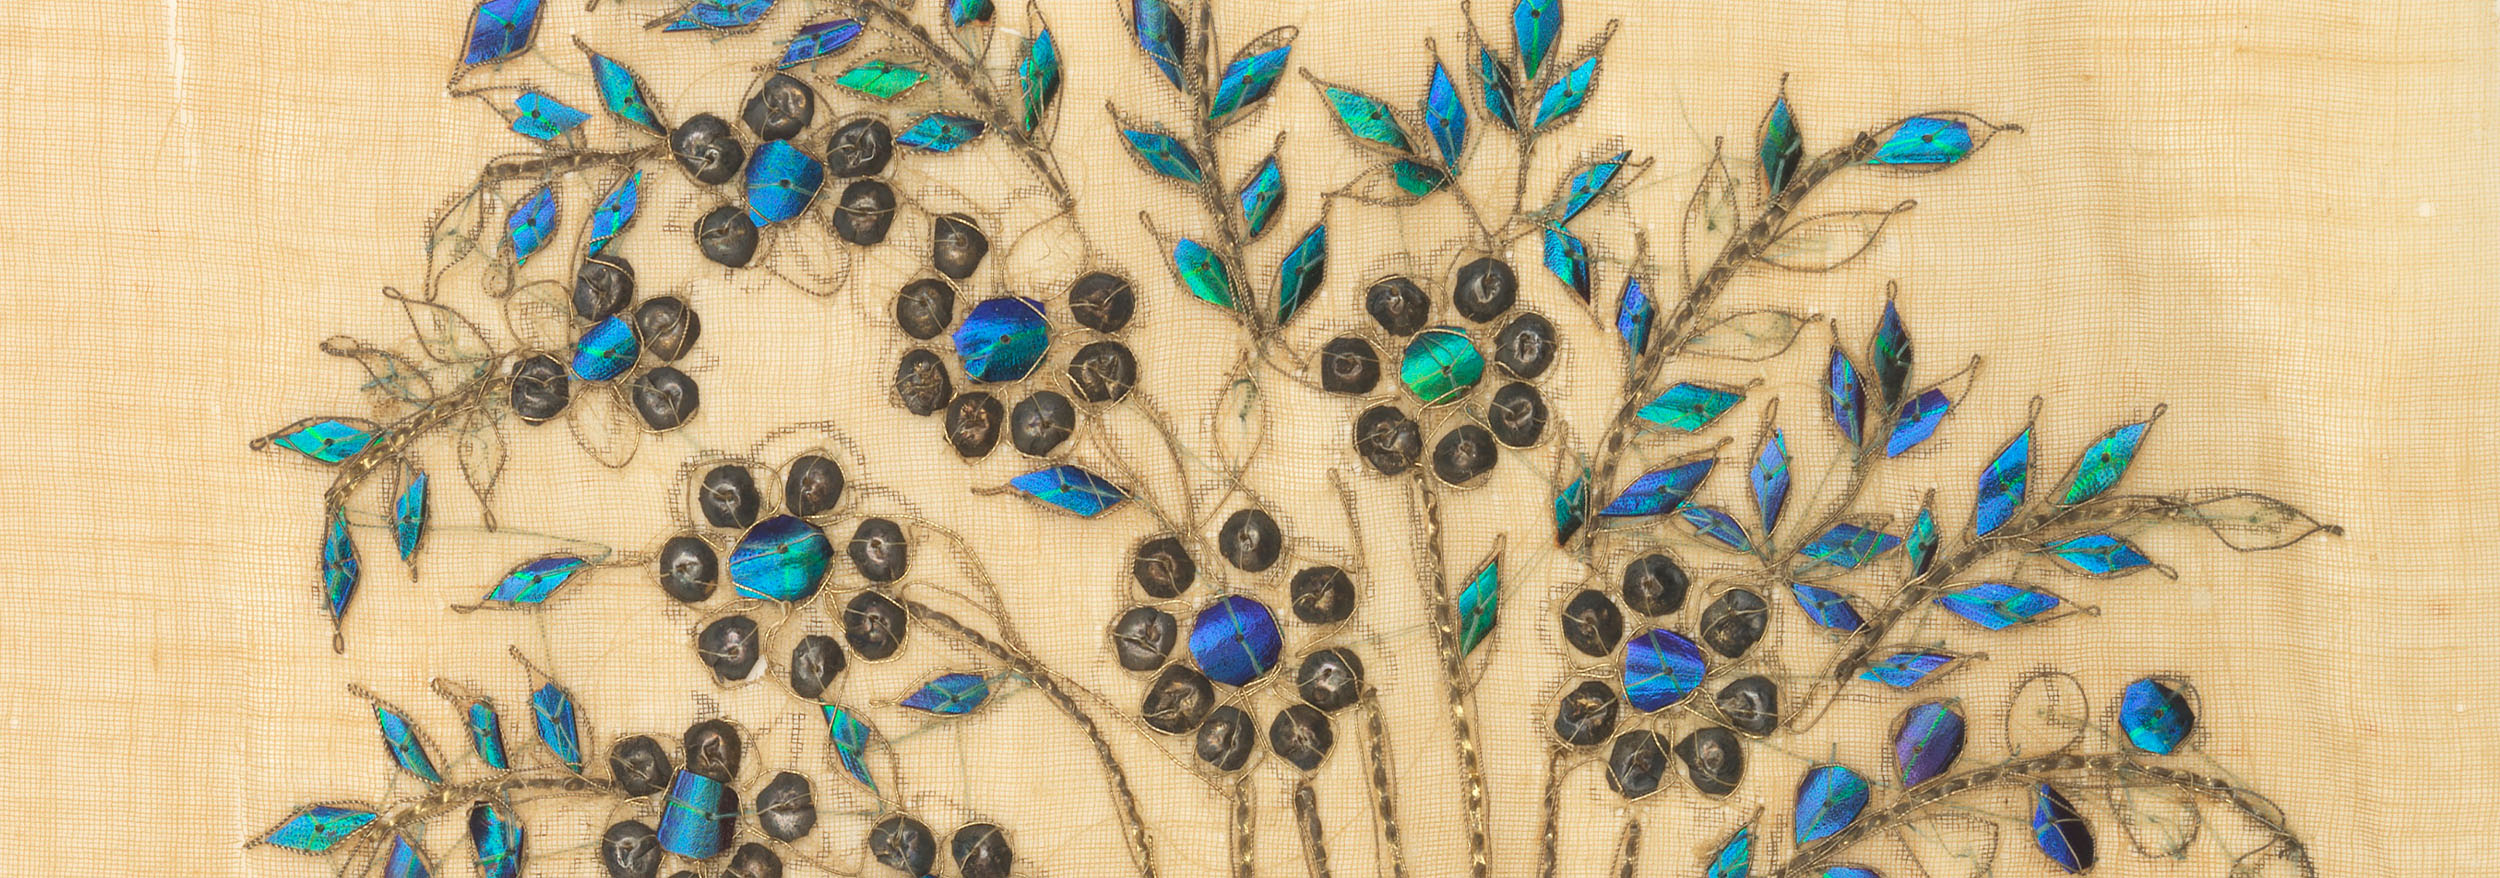 A close-up shot of a detail from a textile showing several fragments of iridescent beetle wings sewn onto the fabric.